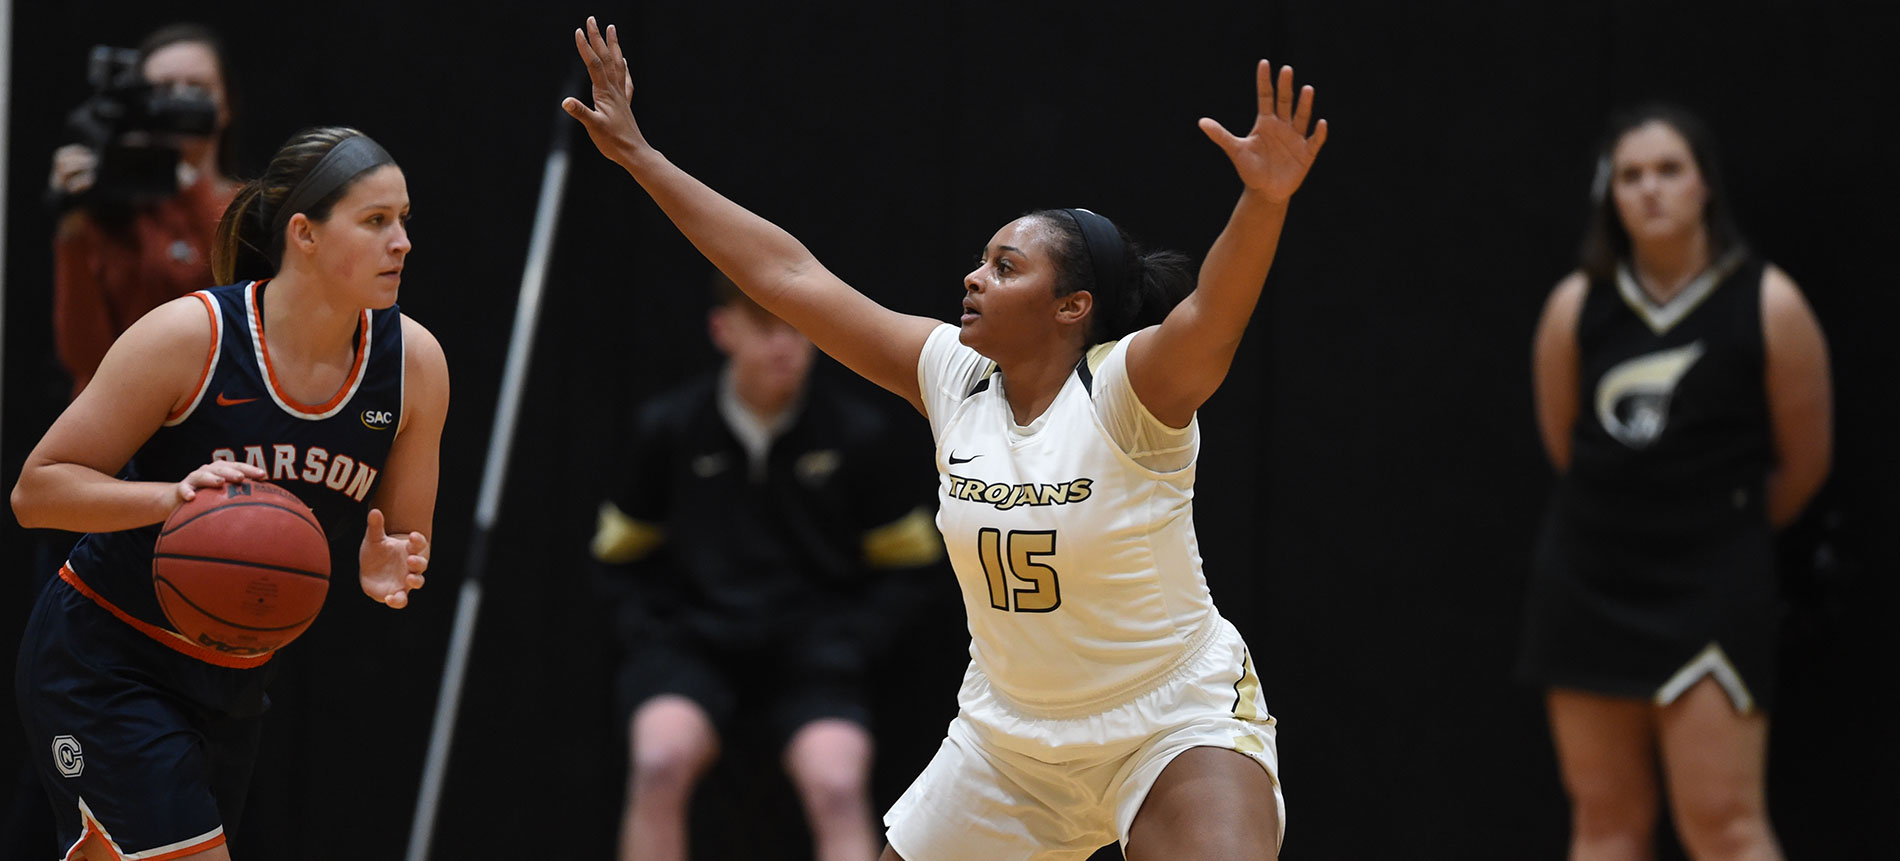 Women’s Basketball Game Notes Released for Wingate